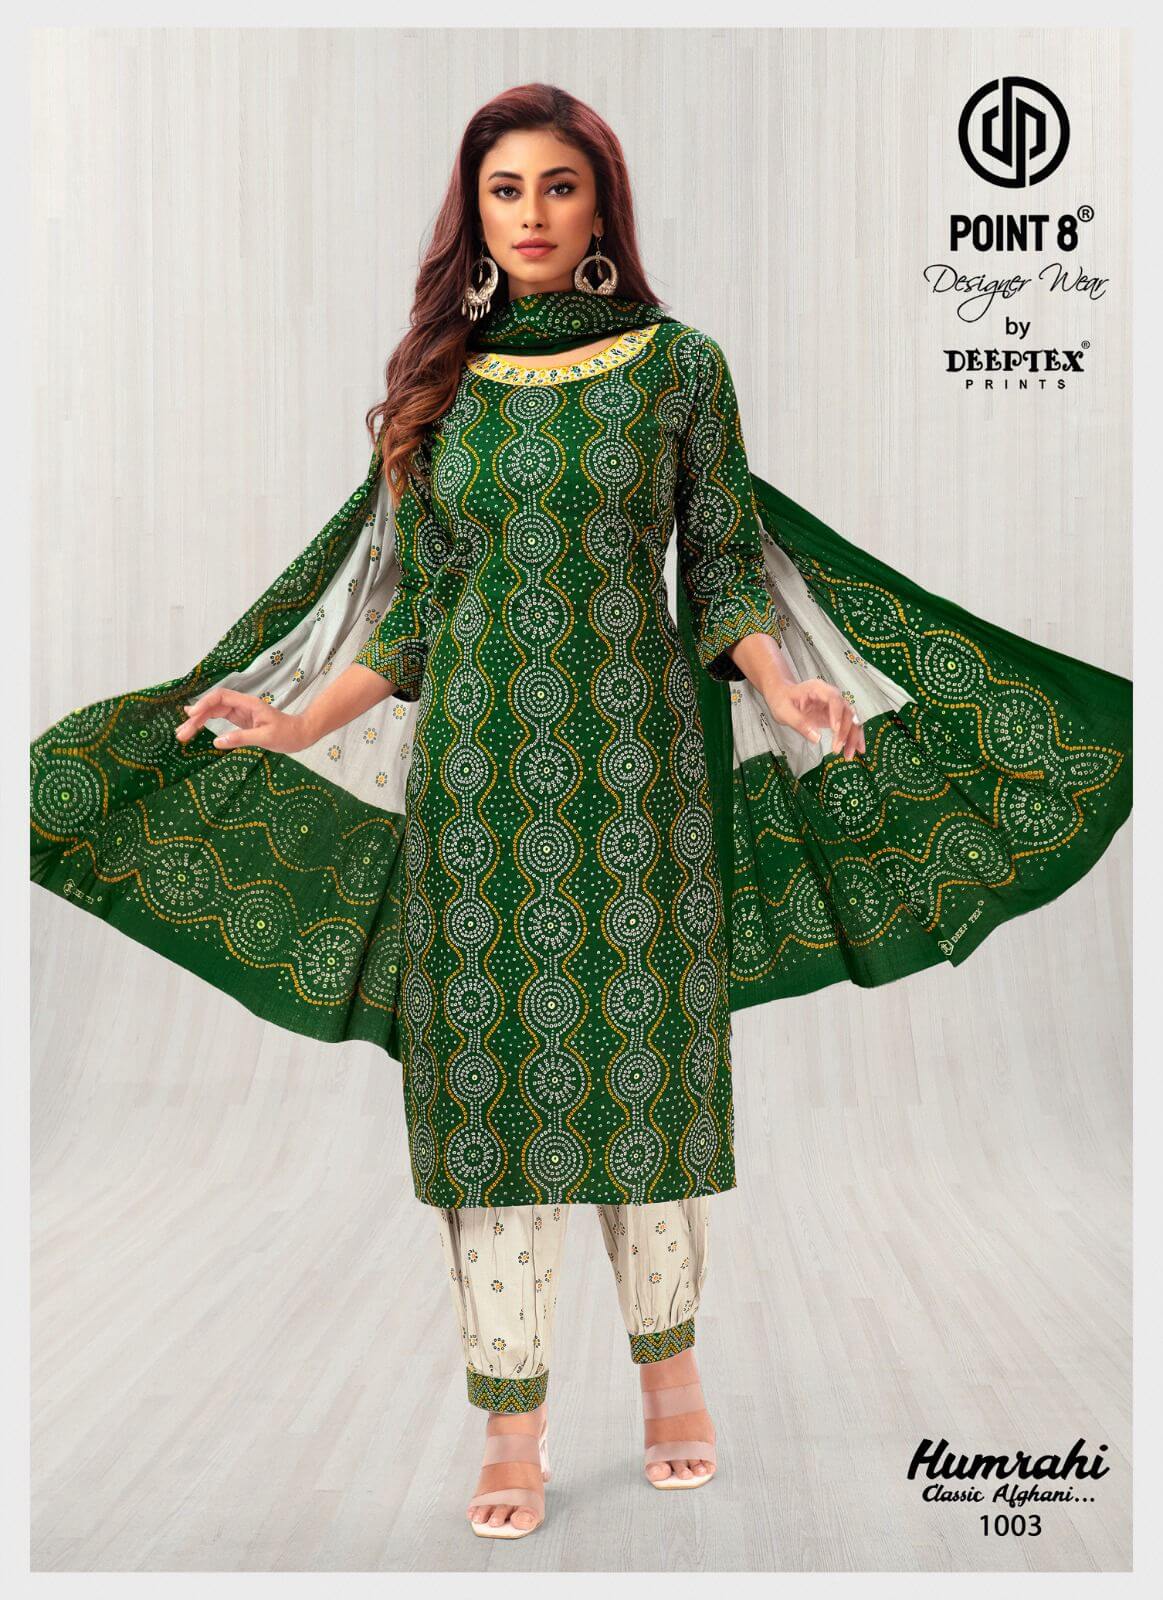 Deeptex Point 8 Humrahi vol 1 collection 4